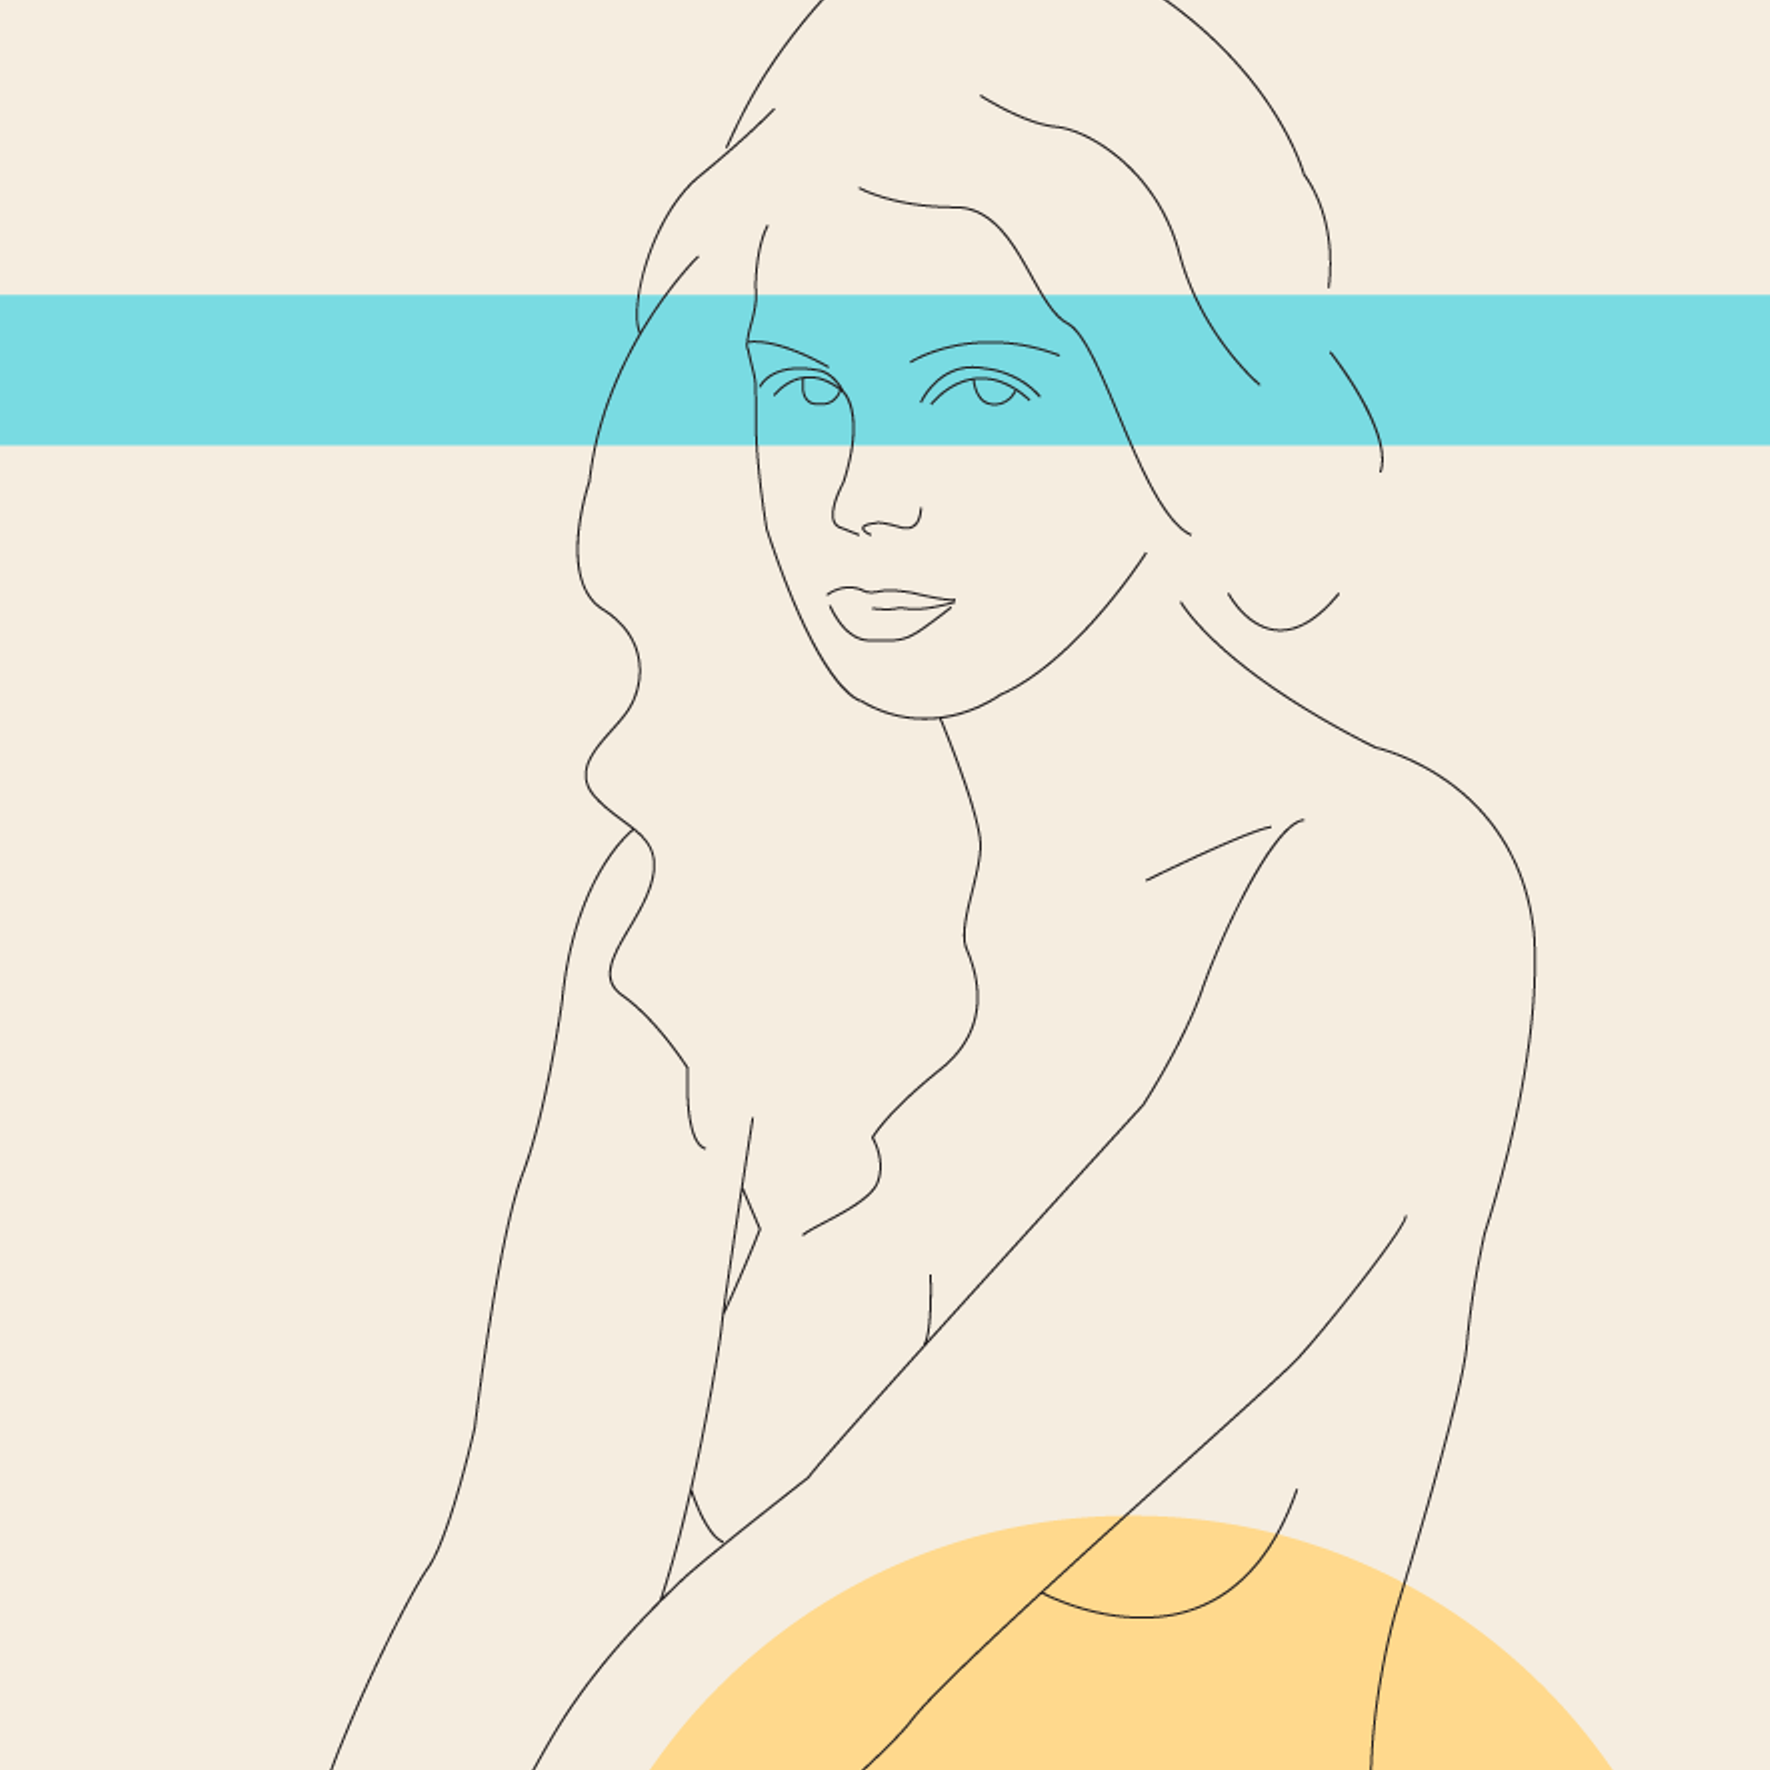 Close up of a digital illustration by Clarrie-Anne on eco fine art paper titled I Am Woman showing a handdrawn lined woman sitting with an abstract yellow circle and grey border line in the picture.